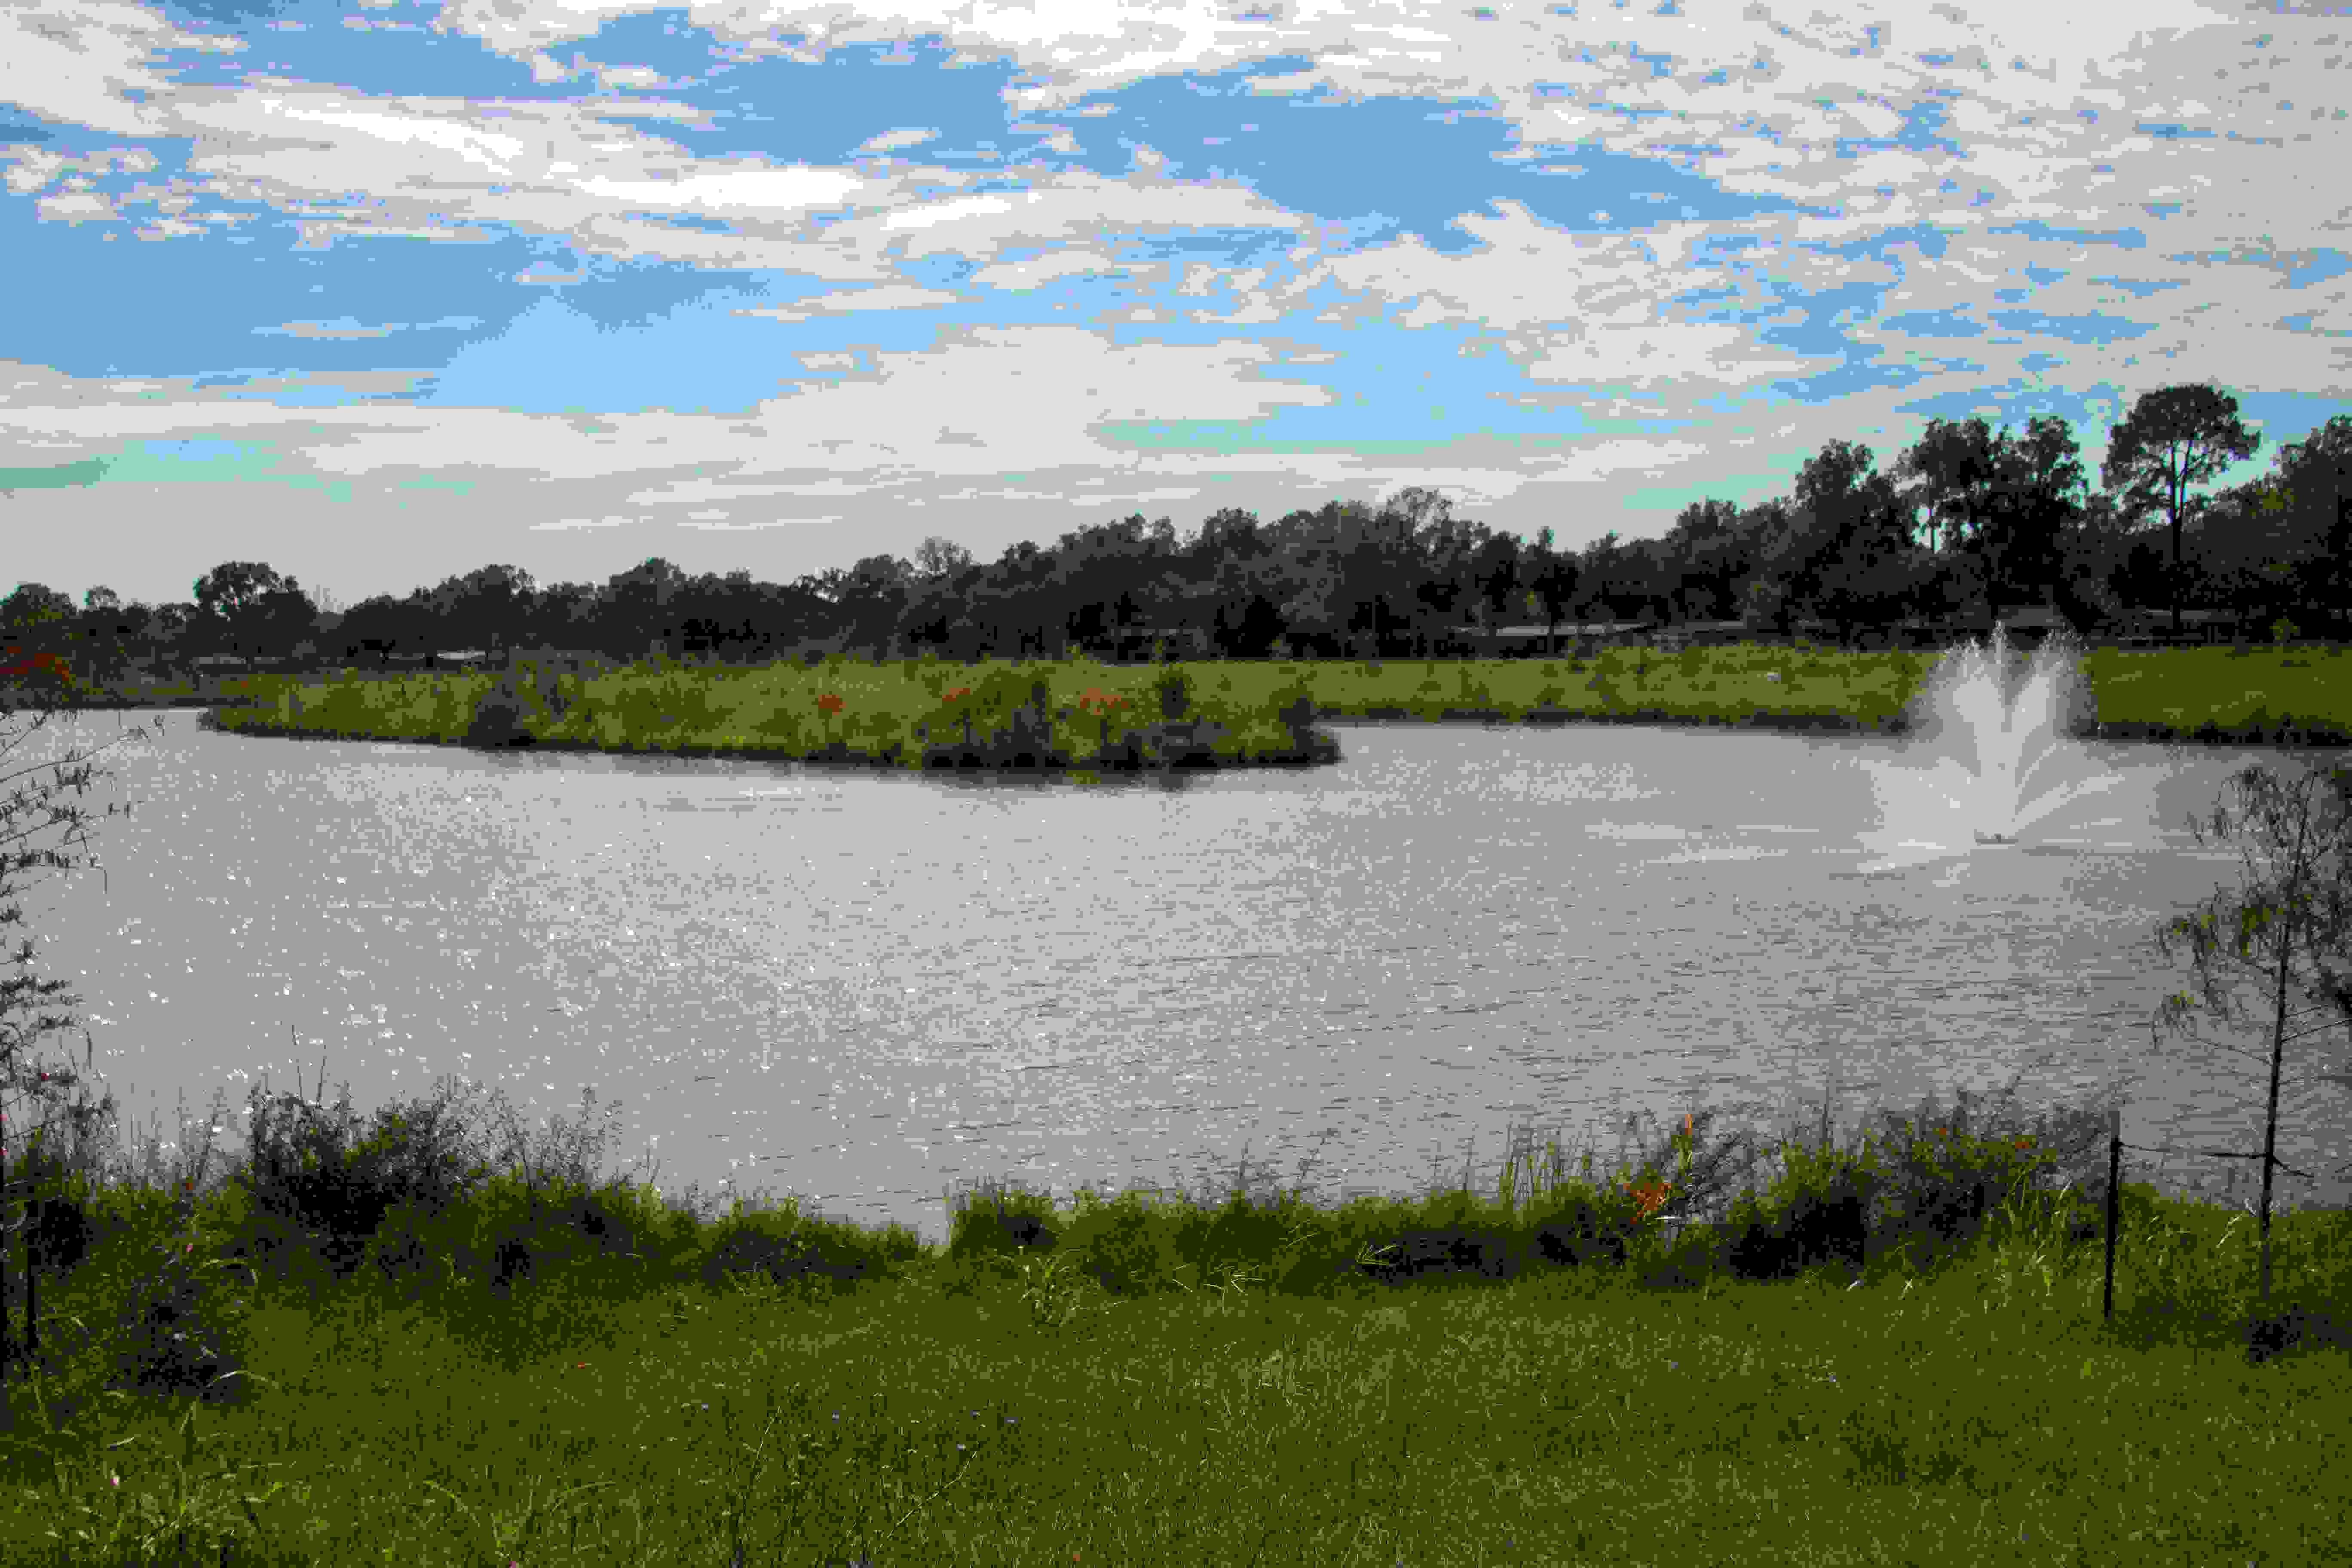 Exploration Green: a 200-acre former golf course that has been turned into a large-scale stormwater detention area and nature reserve, located in the Clear Lake area in Houston.